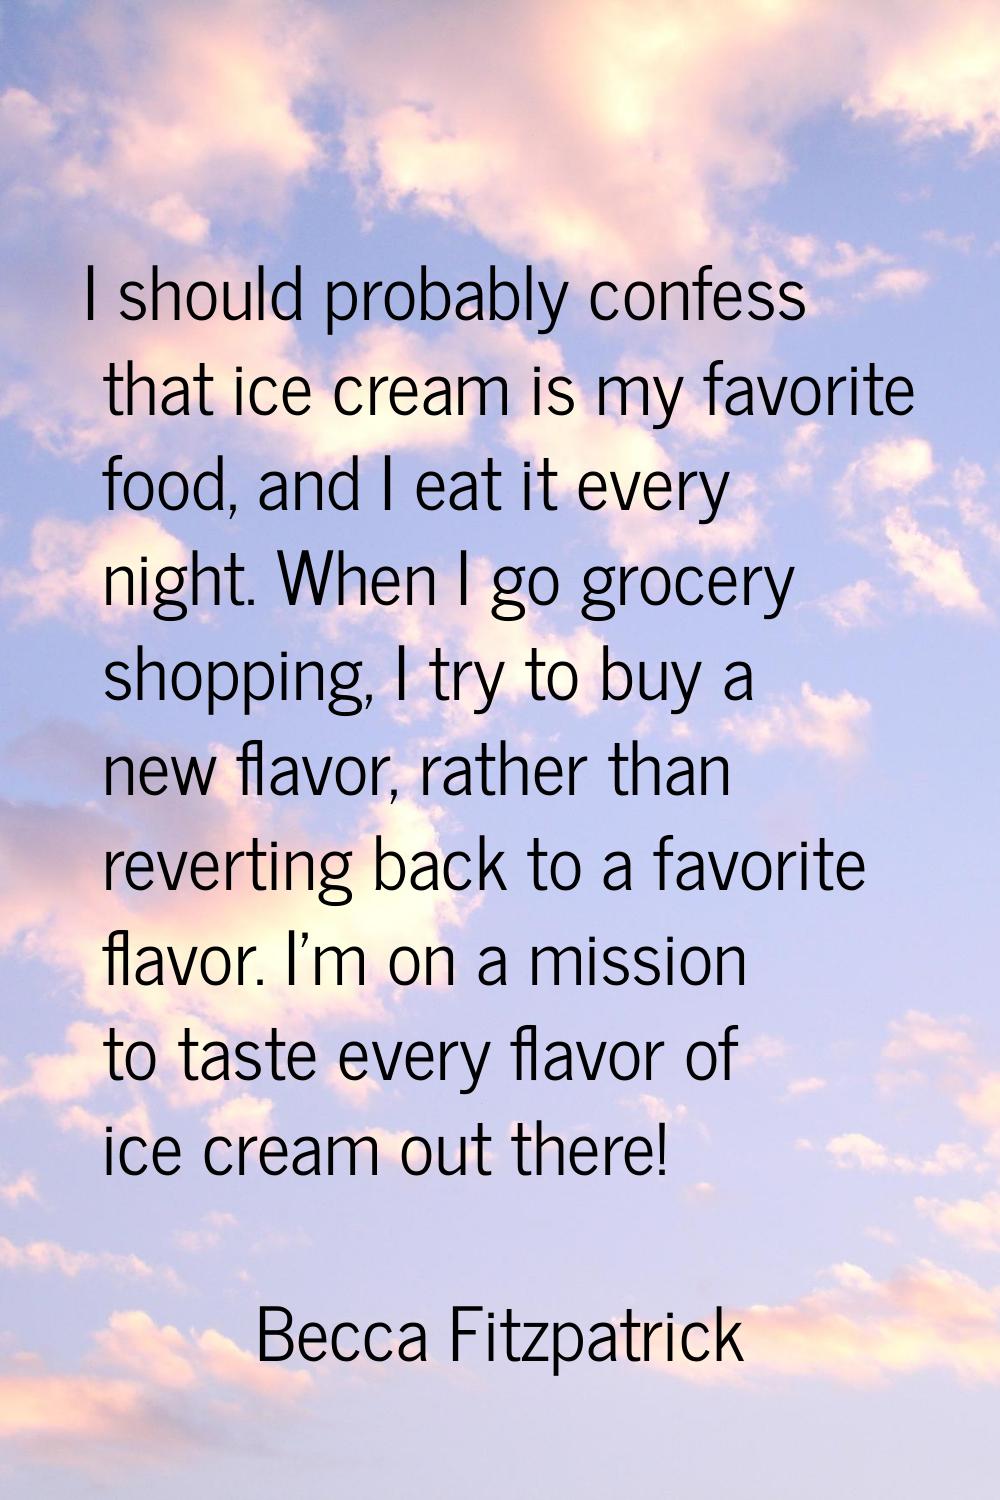 I should probably confess that ice cream is my favorite food, and I eat it every night. When I go g